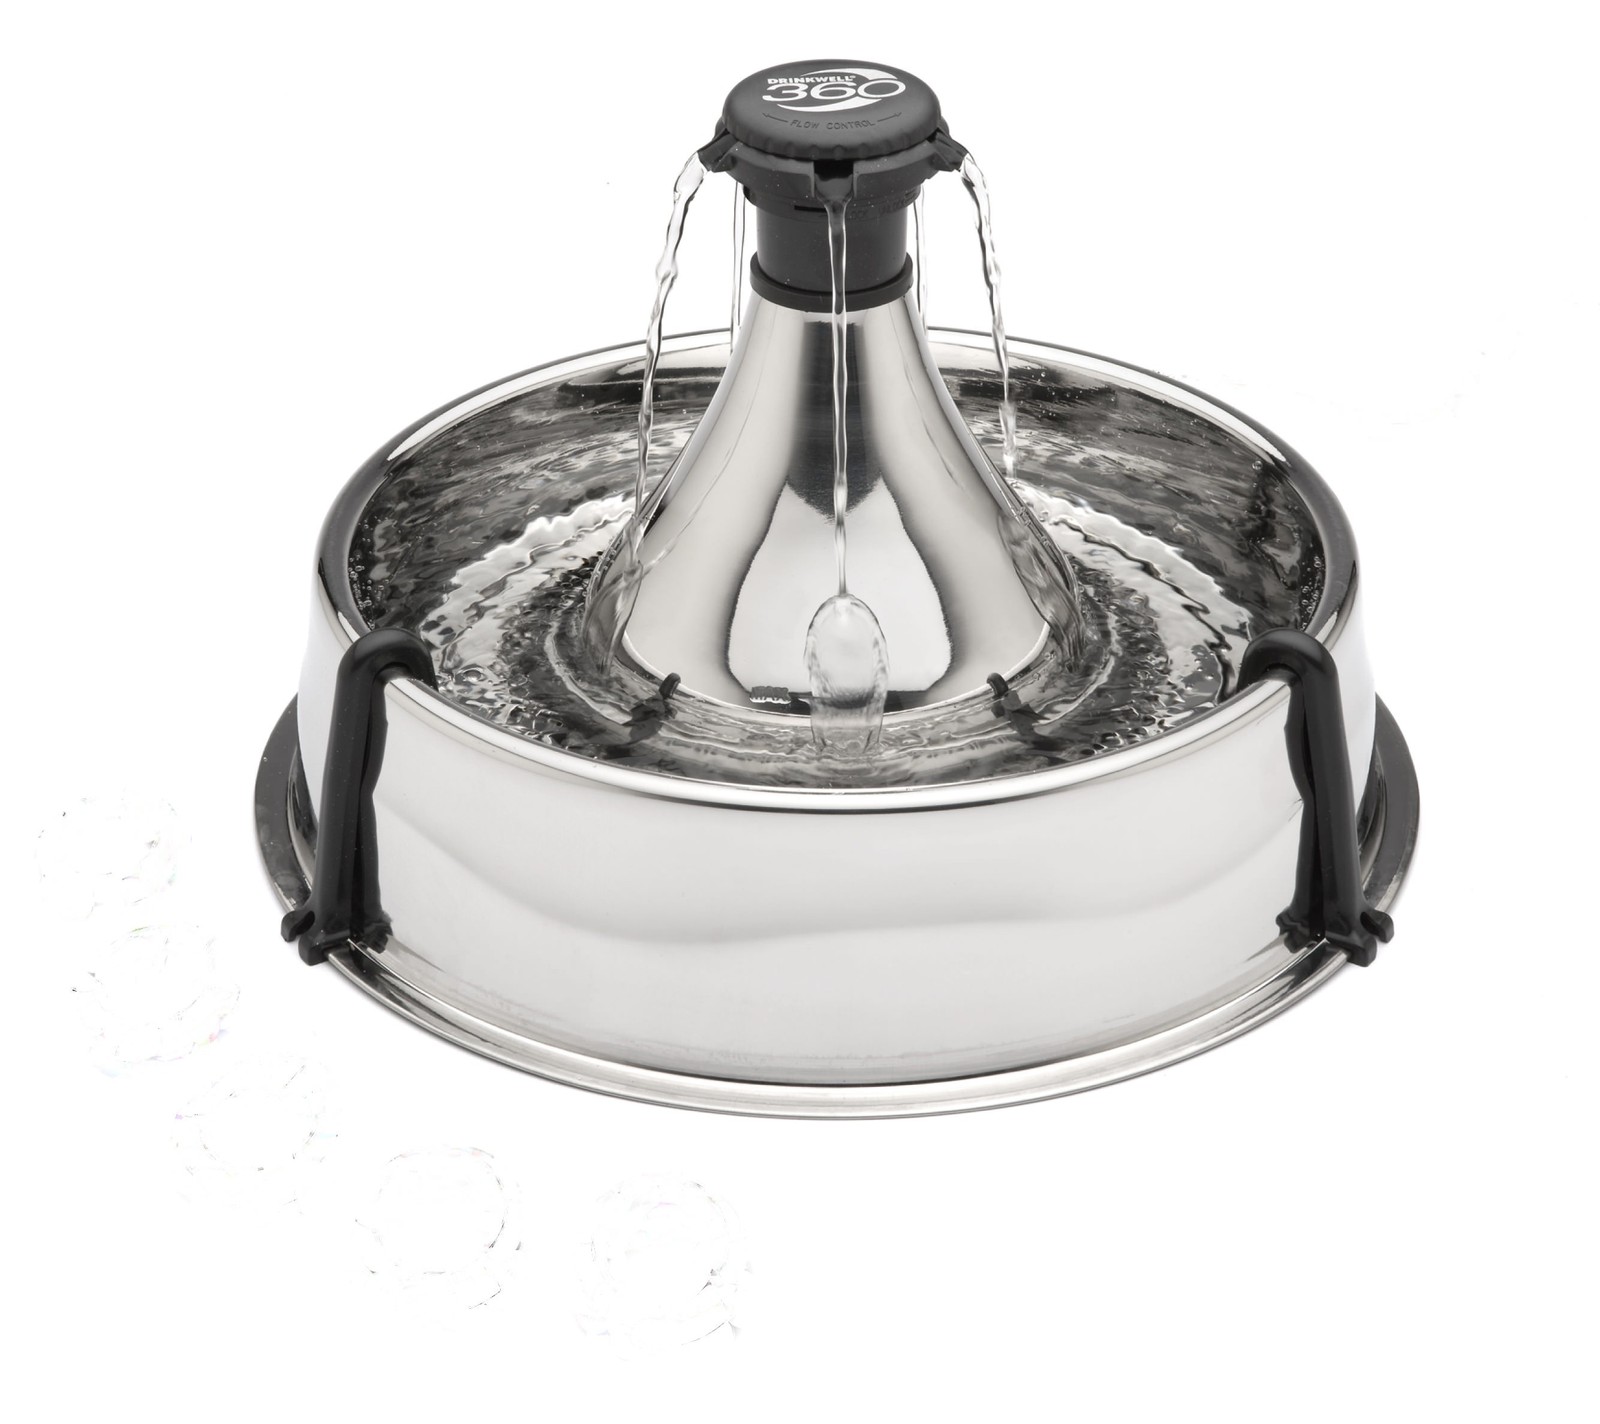 Pet Shop Direct - Drinkwell 360 Stainless Steel Pet Fountain 3.8 Litres Drinkwell 360 Pet Fountain Stainless Steel